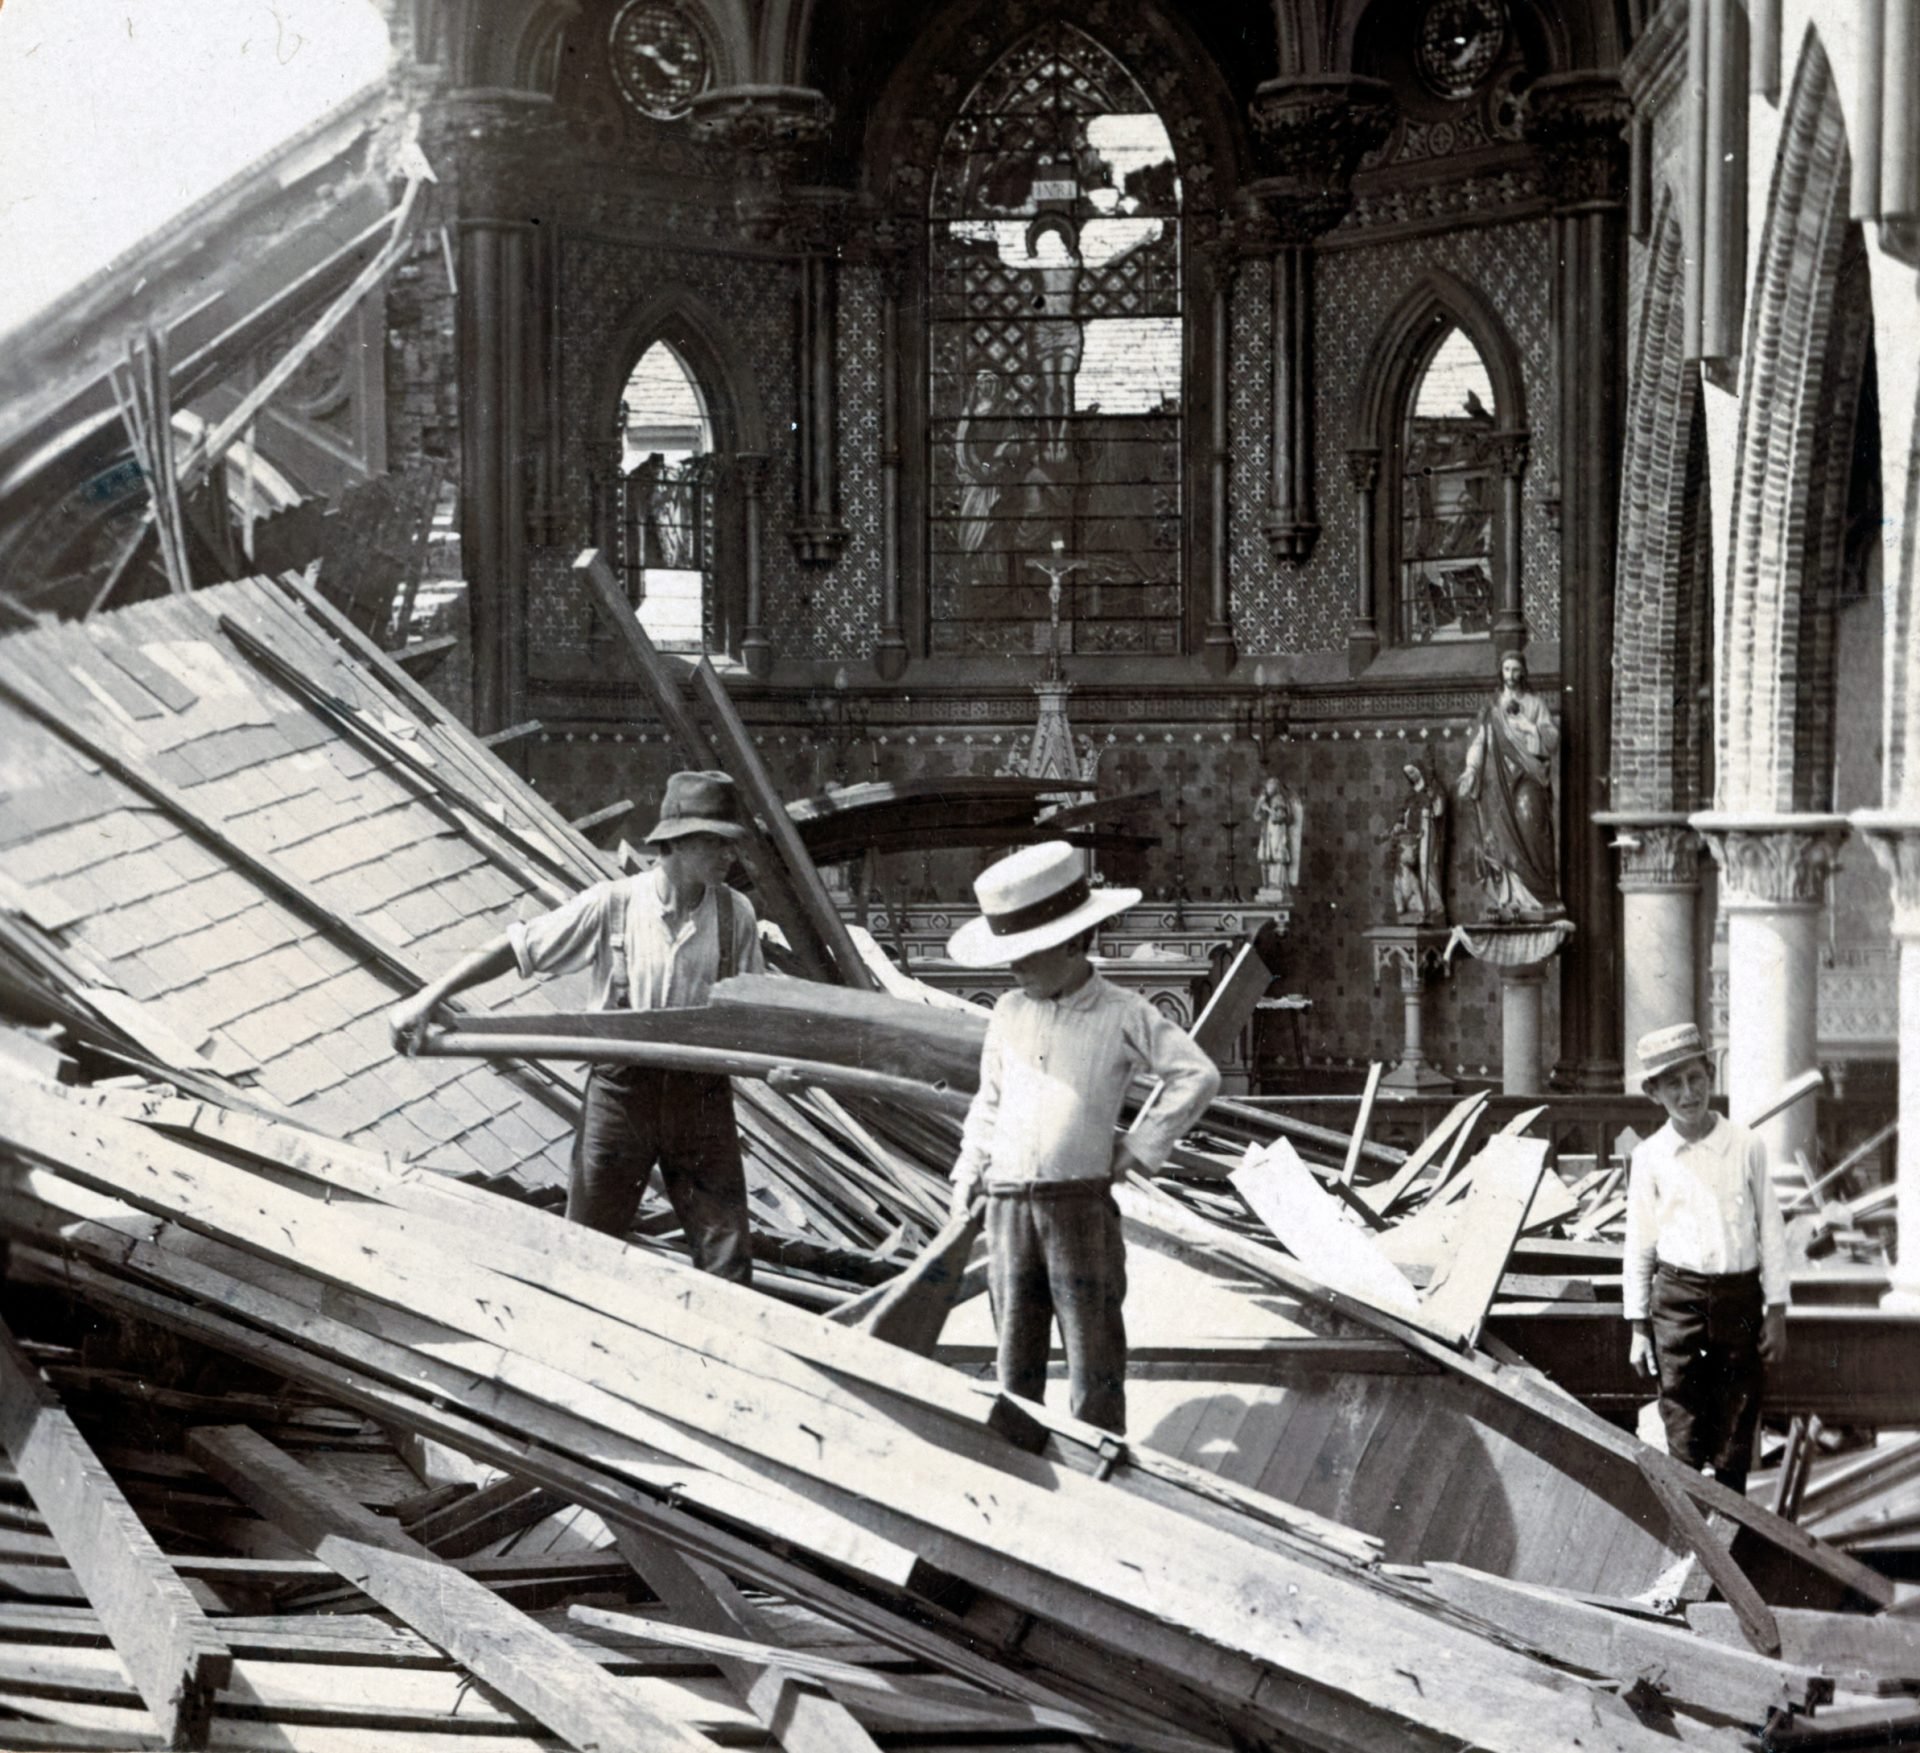 Three young men standing on a pile of debris inside a damaged church with an intact altar and stained glass window in the background.